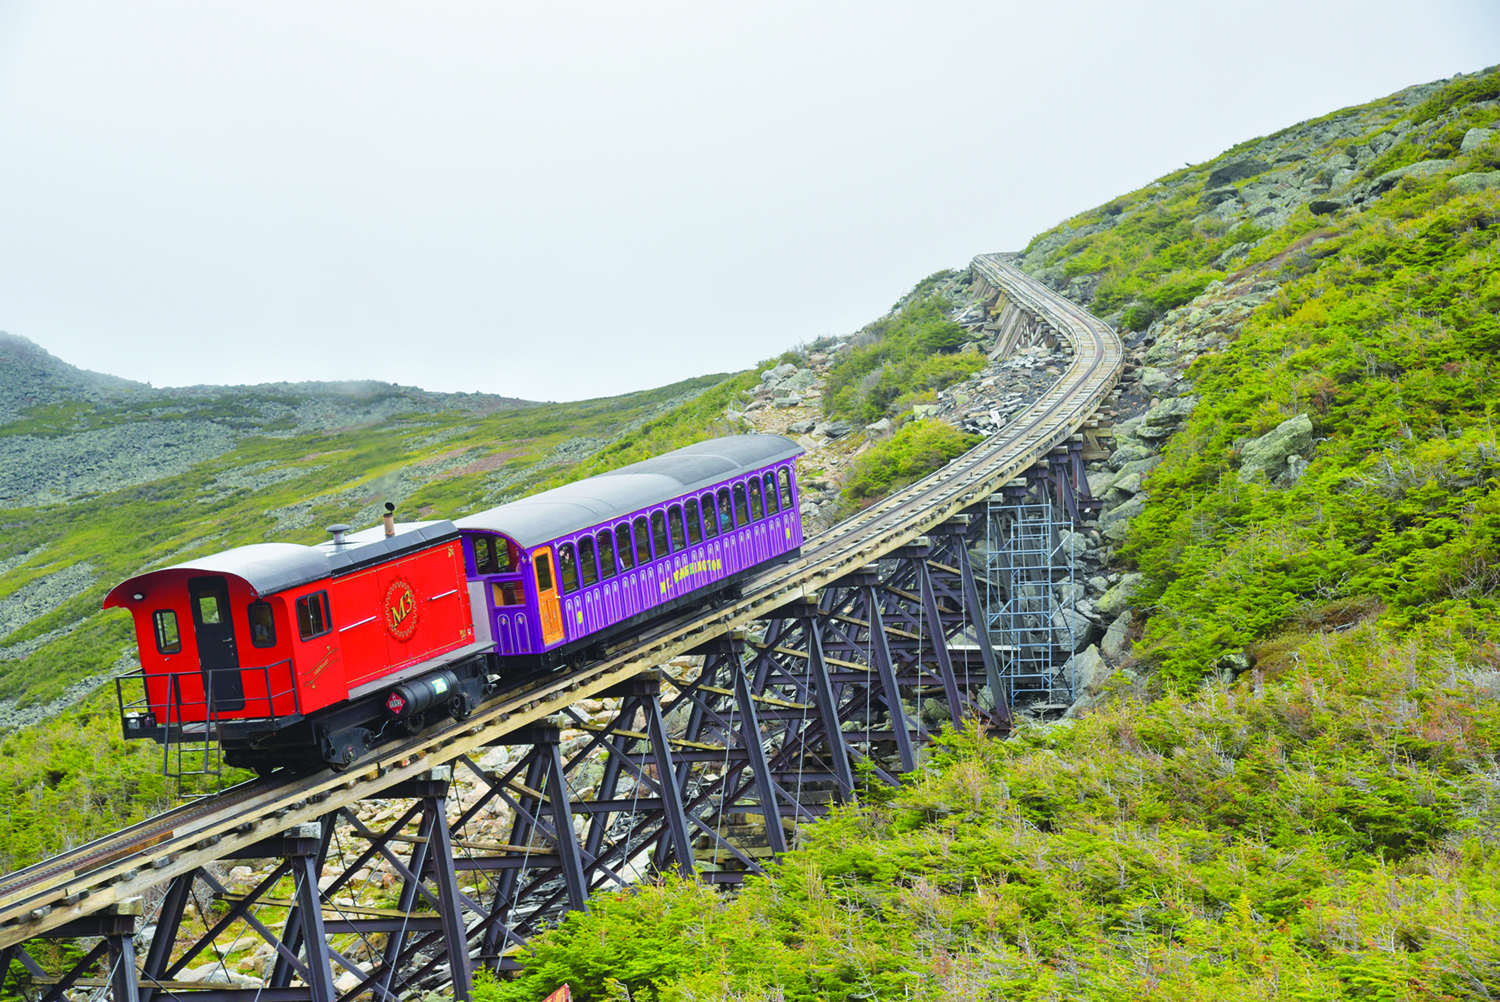 The Mount Washington Cog Railway in New Hamp- shire has been transporting visitors to the summit, 6,288 ft. above sea level, since 1869. The 6-mile, 3-hour round trip features an average grade of 25% (Photo courtesy of Mt. Washington Cog Railway)